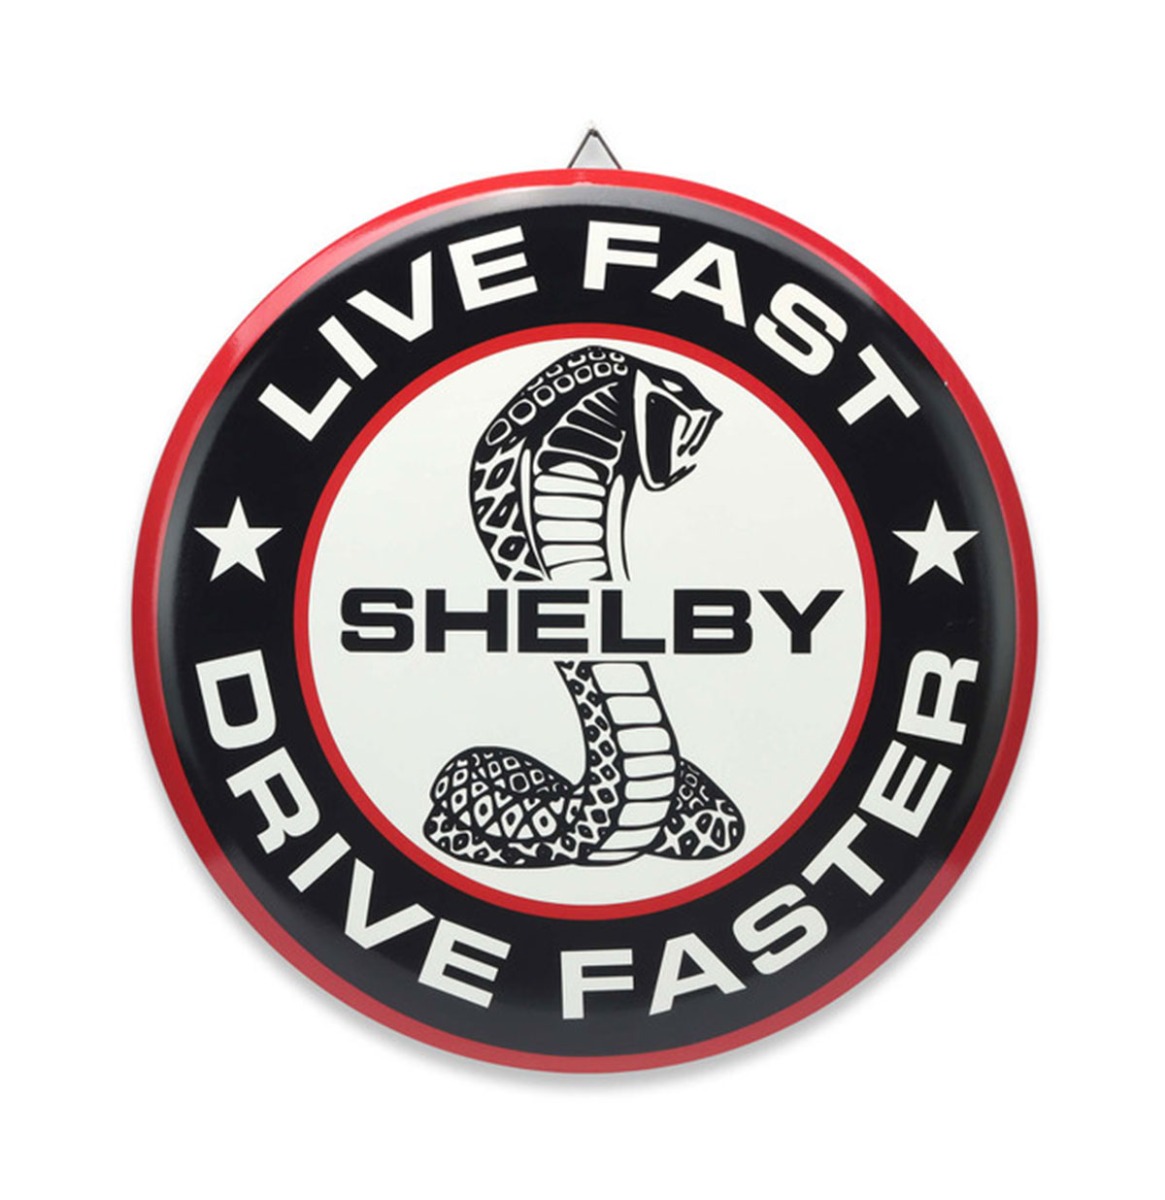 Fiftiesstore Shelby Live Fast Drive Faster Rond Metalen Bord - Ø46cm